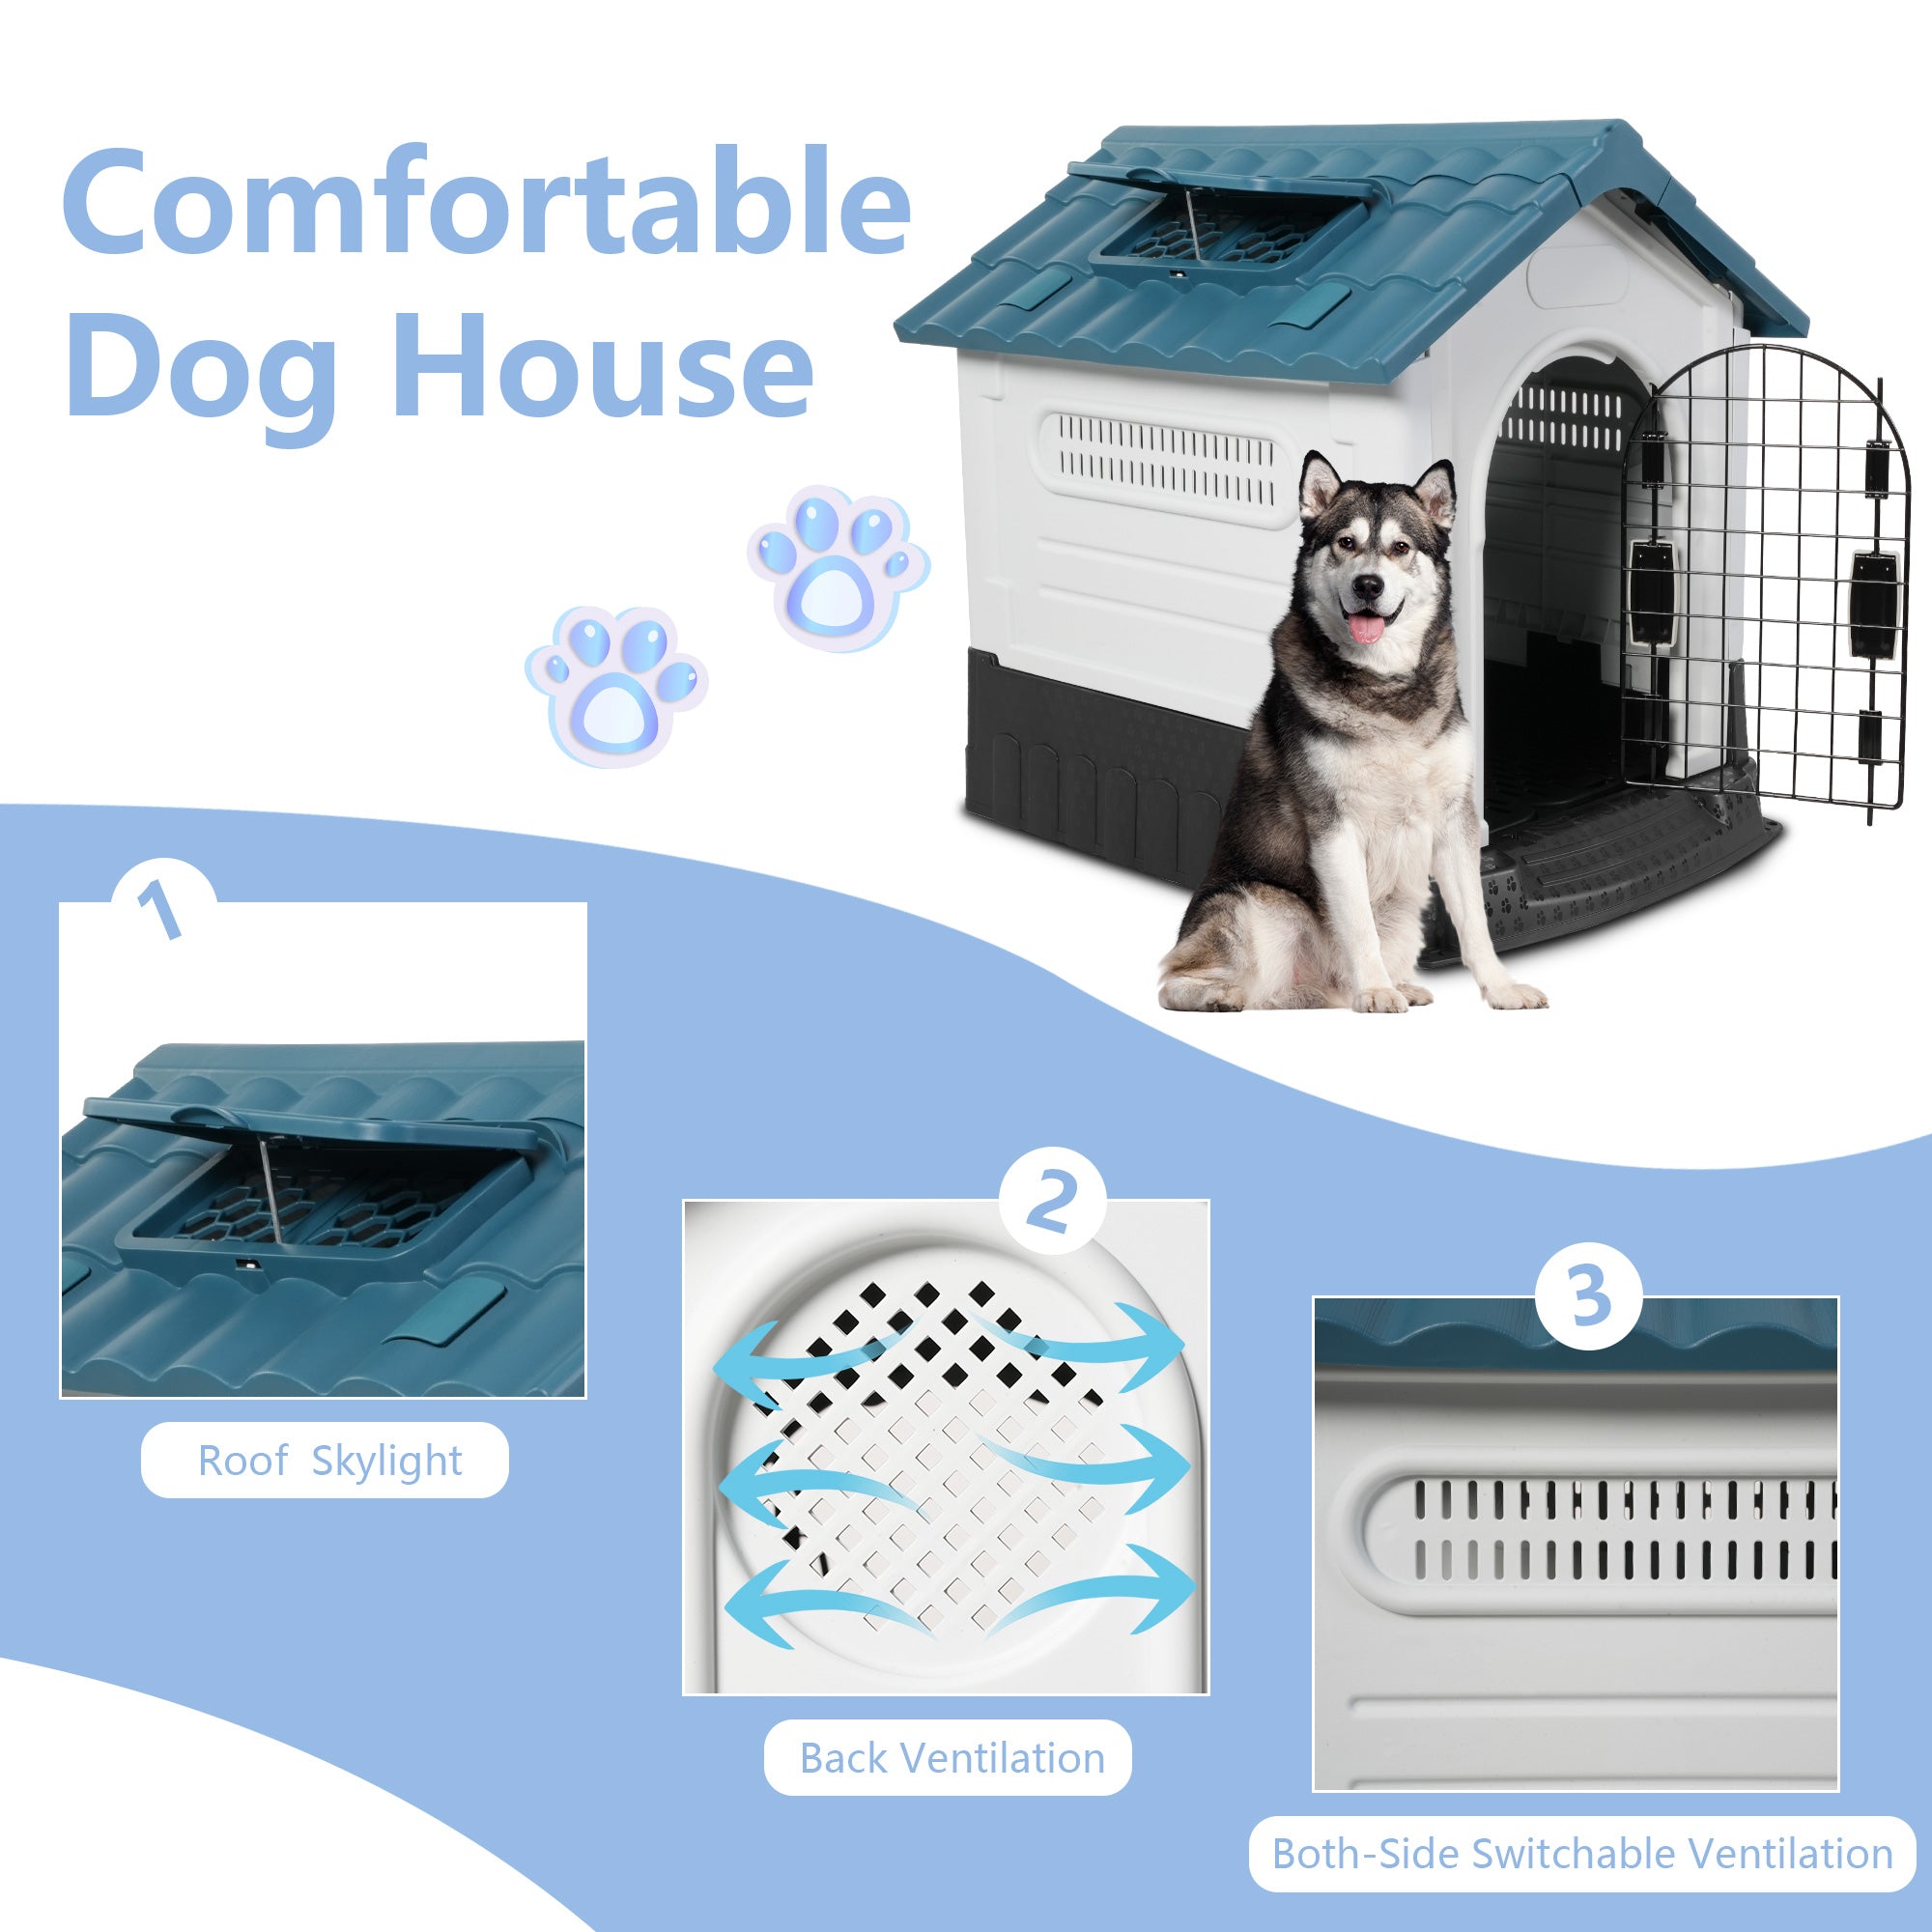 Outdoor Large Dog House Plastic Waterproof Kennel with Air Vents, 42.9"L x 40.5"W x 46.4"H, Blue Roof